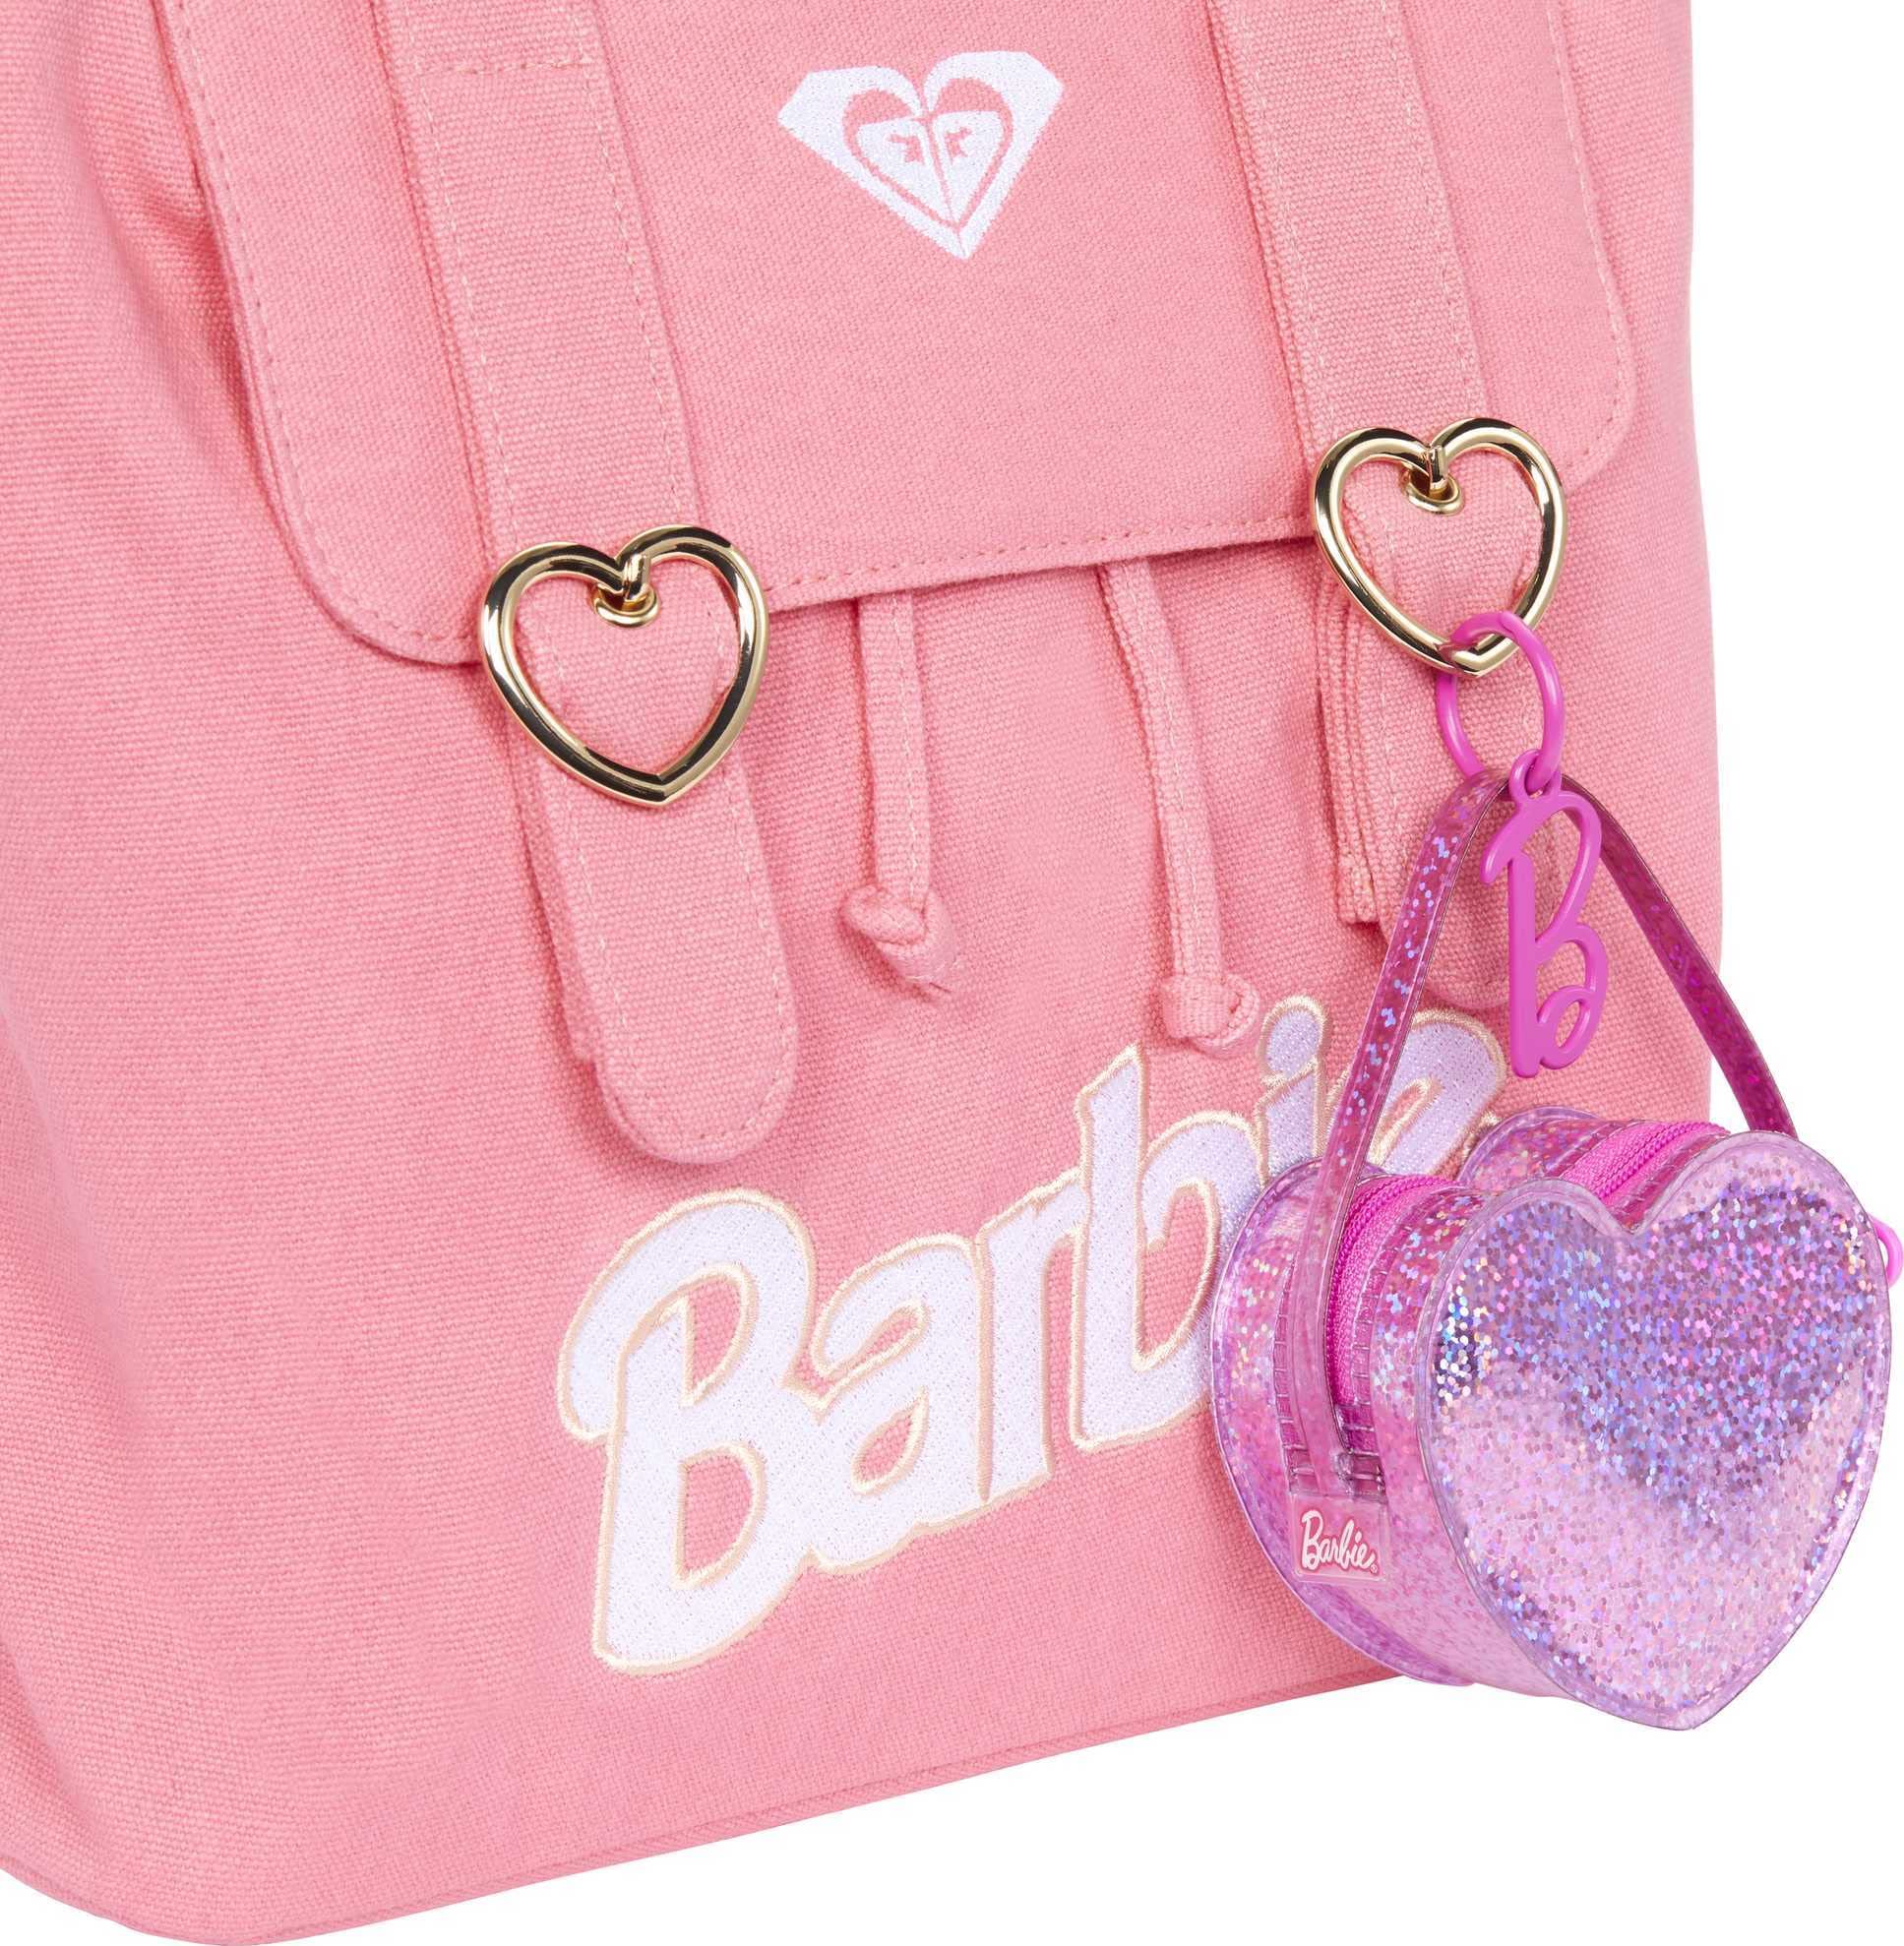 Barbie Clothes, Deluxe Clip-On Bag with Birthday Outfit and Five Themed Accessories for Barbie Dolls